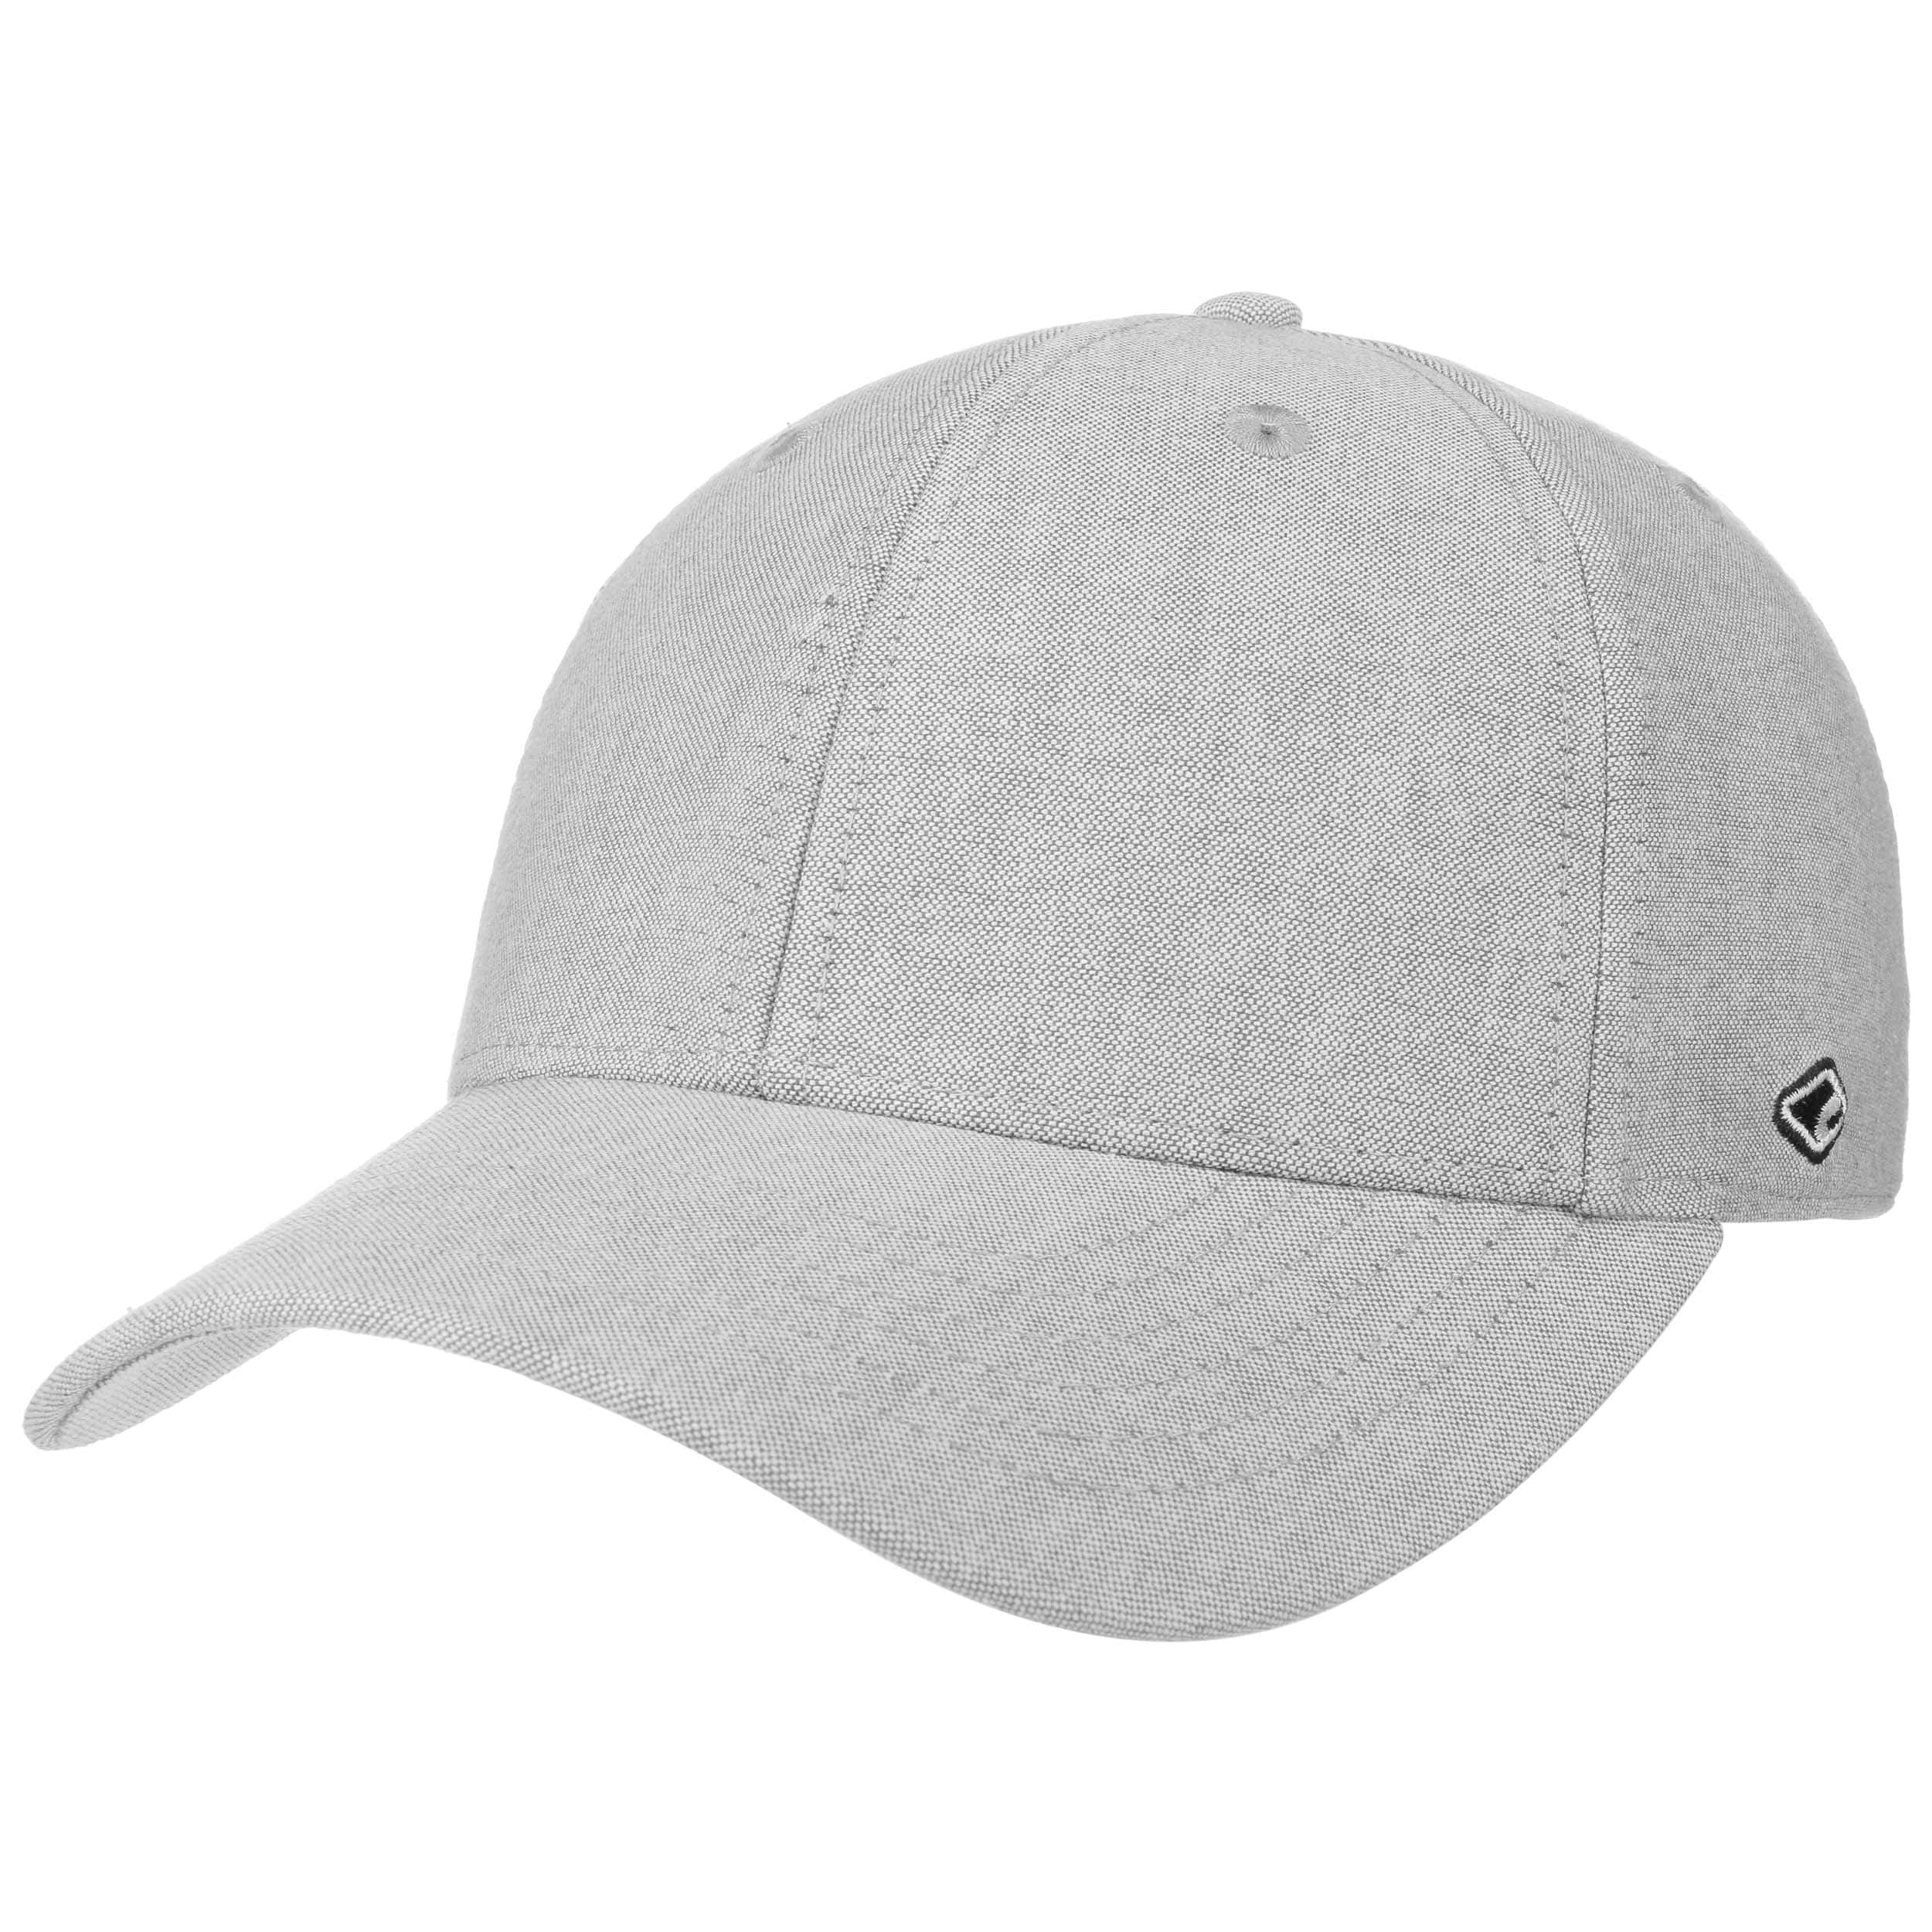 Teran Cap 19,95 - € by Chillouts